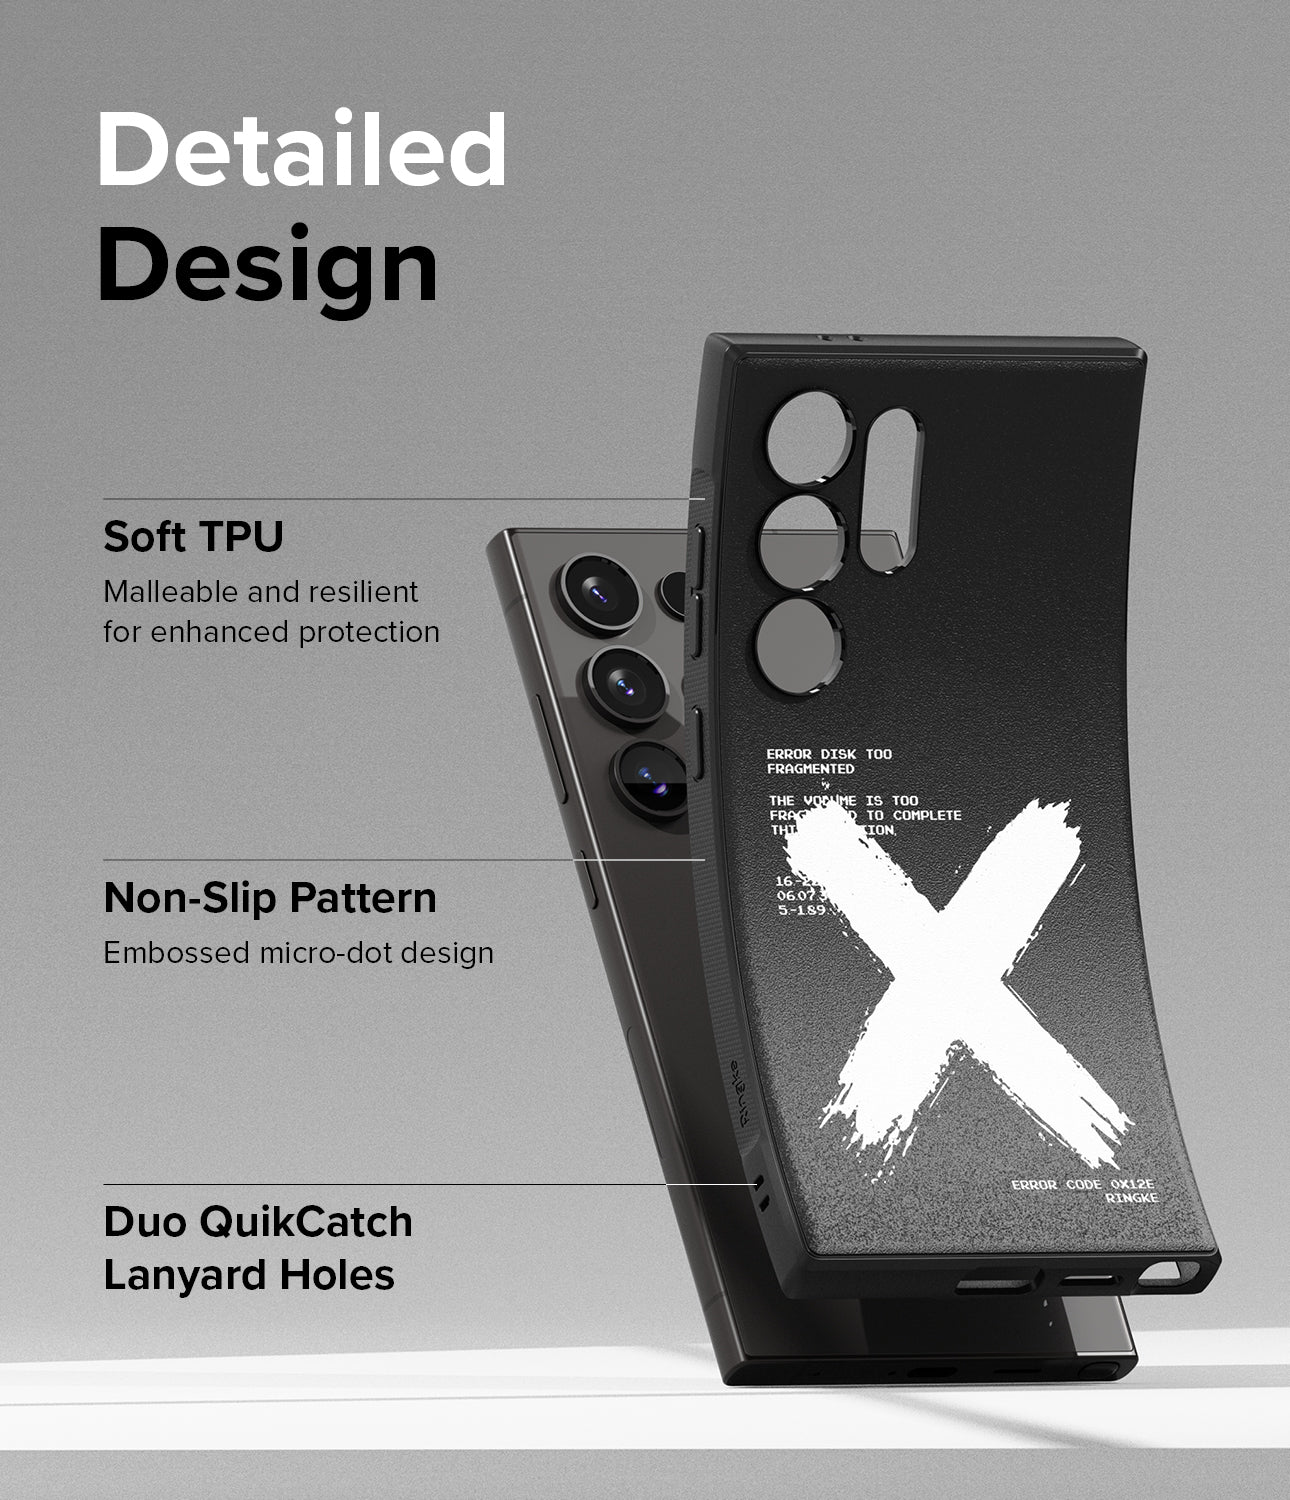 Galaxy S24 Ultra Case | Onyx Design - X - Detailed Design. Malleable and resilient for enhanced protection with Soft TPU. Embossed micro-dot design with Non-Slip Pattern. Duo QuikCatch Lanyard Holes.